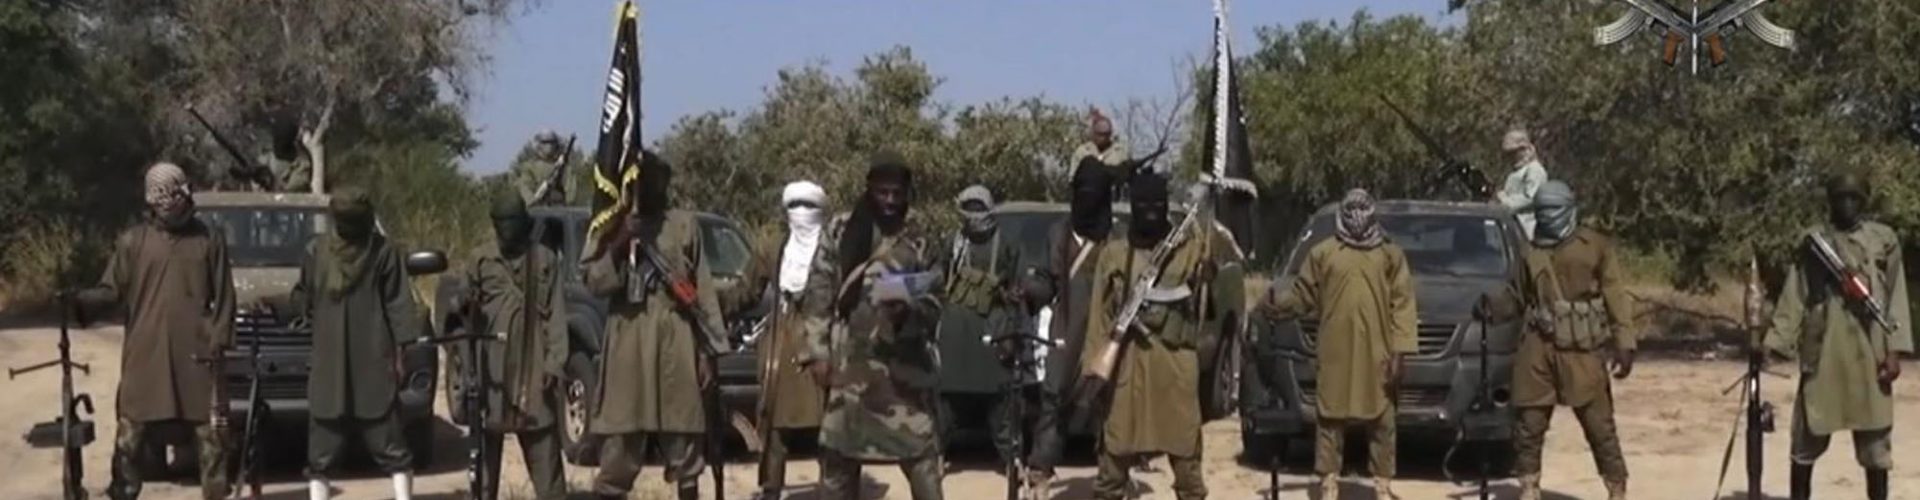 To The Army: Nigerians Have Reason To Fear Al-Qaeda, ISIS Purportedly Penetration  Of Their Country